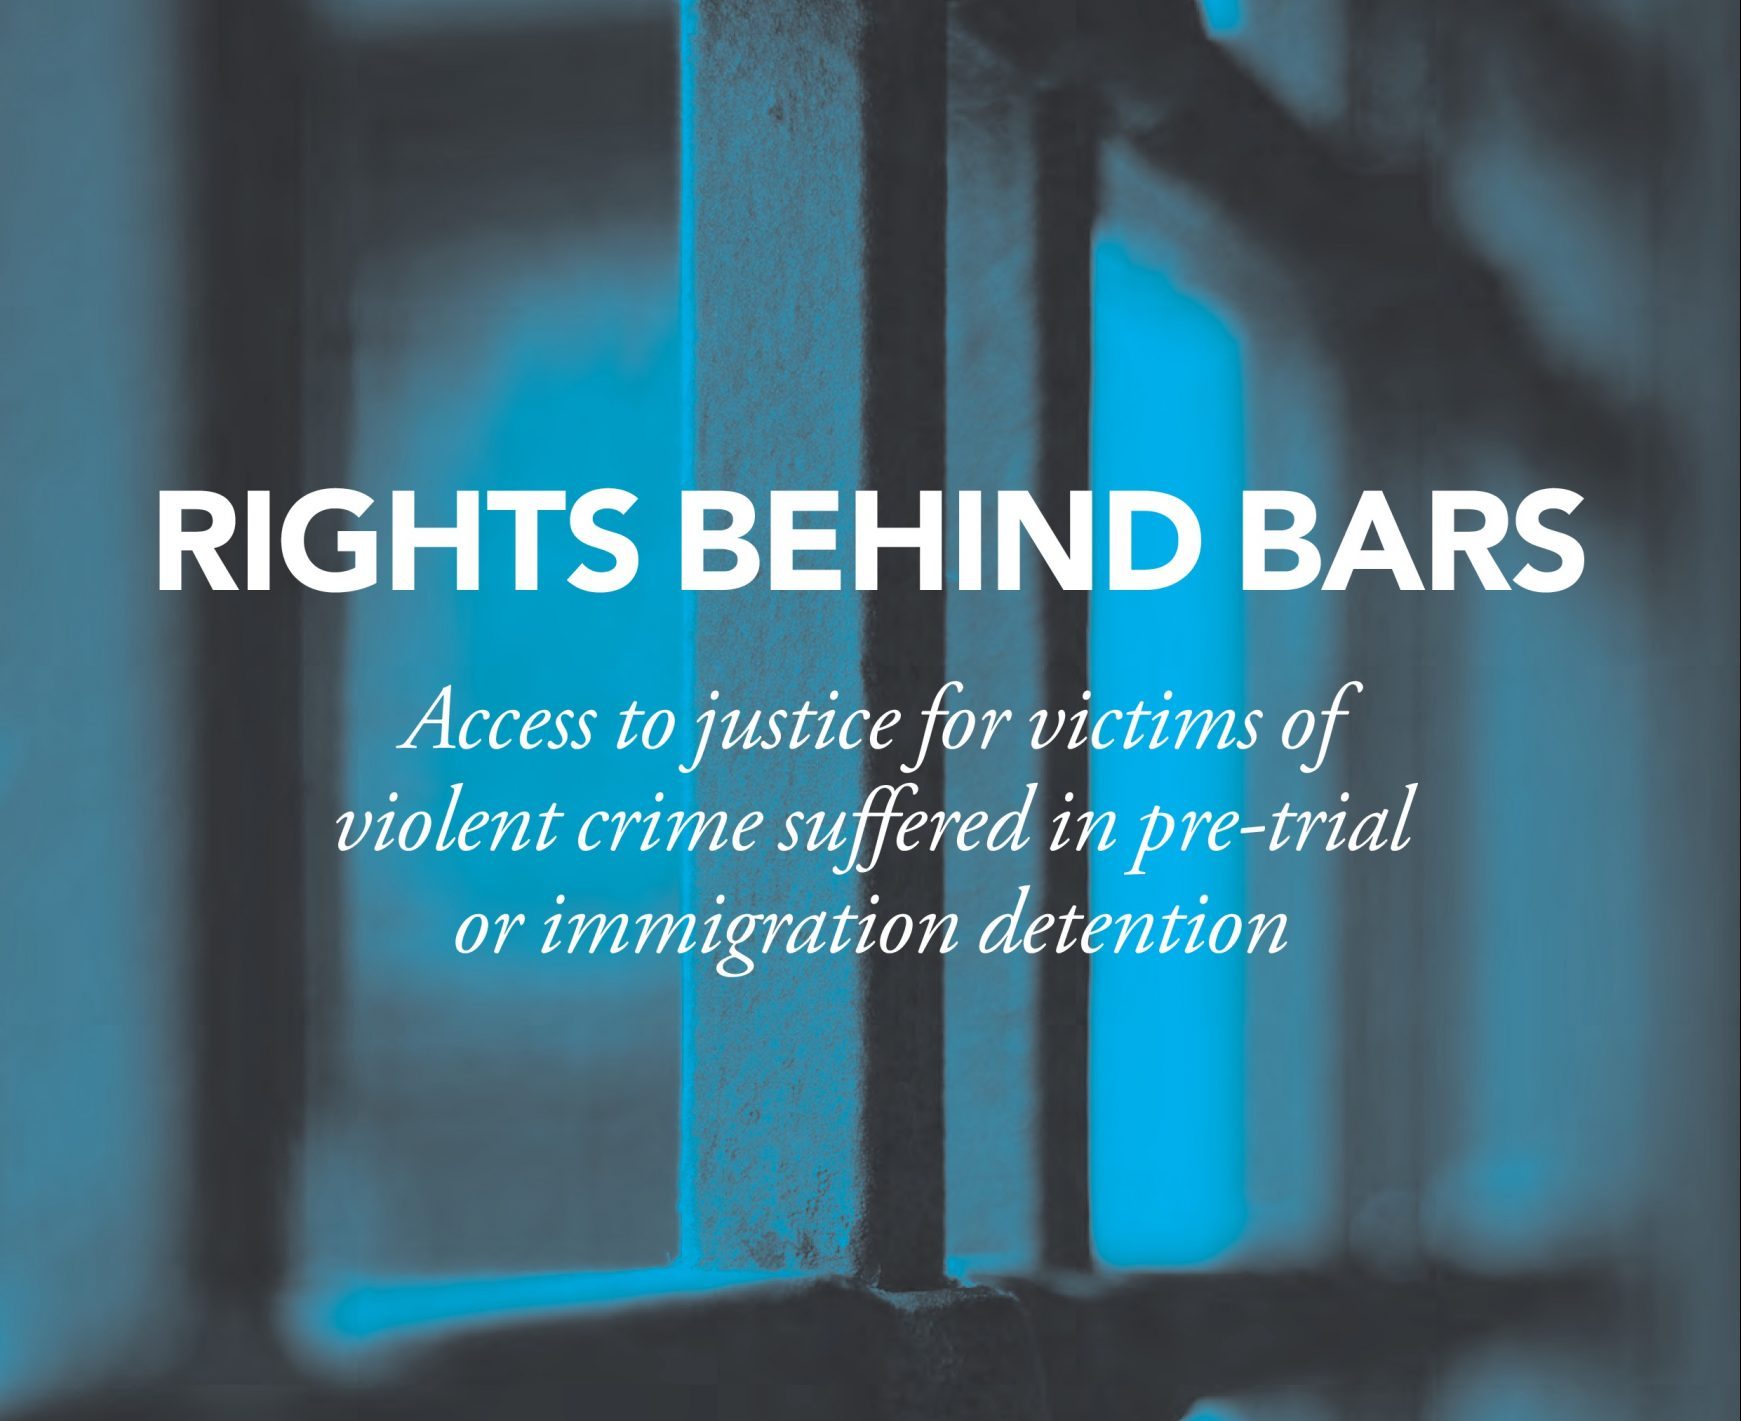 Rights behind bars: Access to justice for victims of violent crime in pre-trial and immigration detention